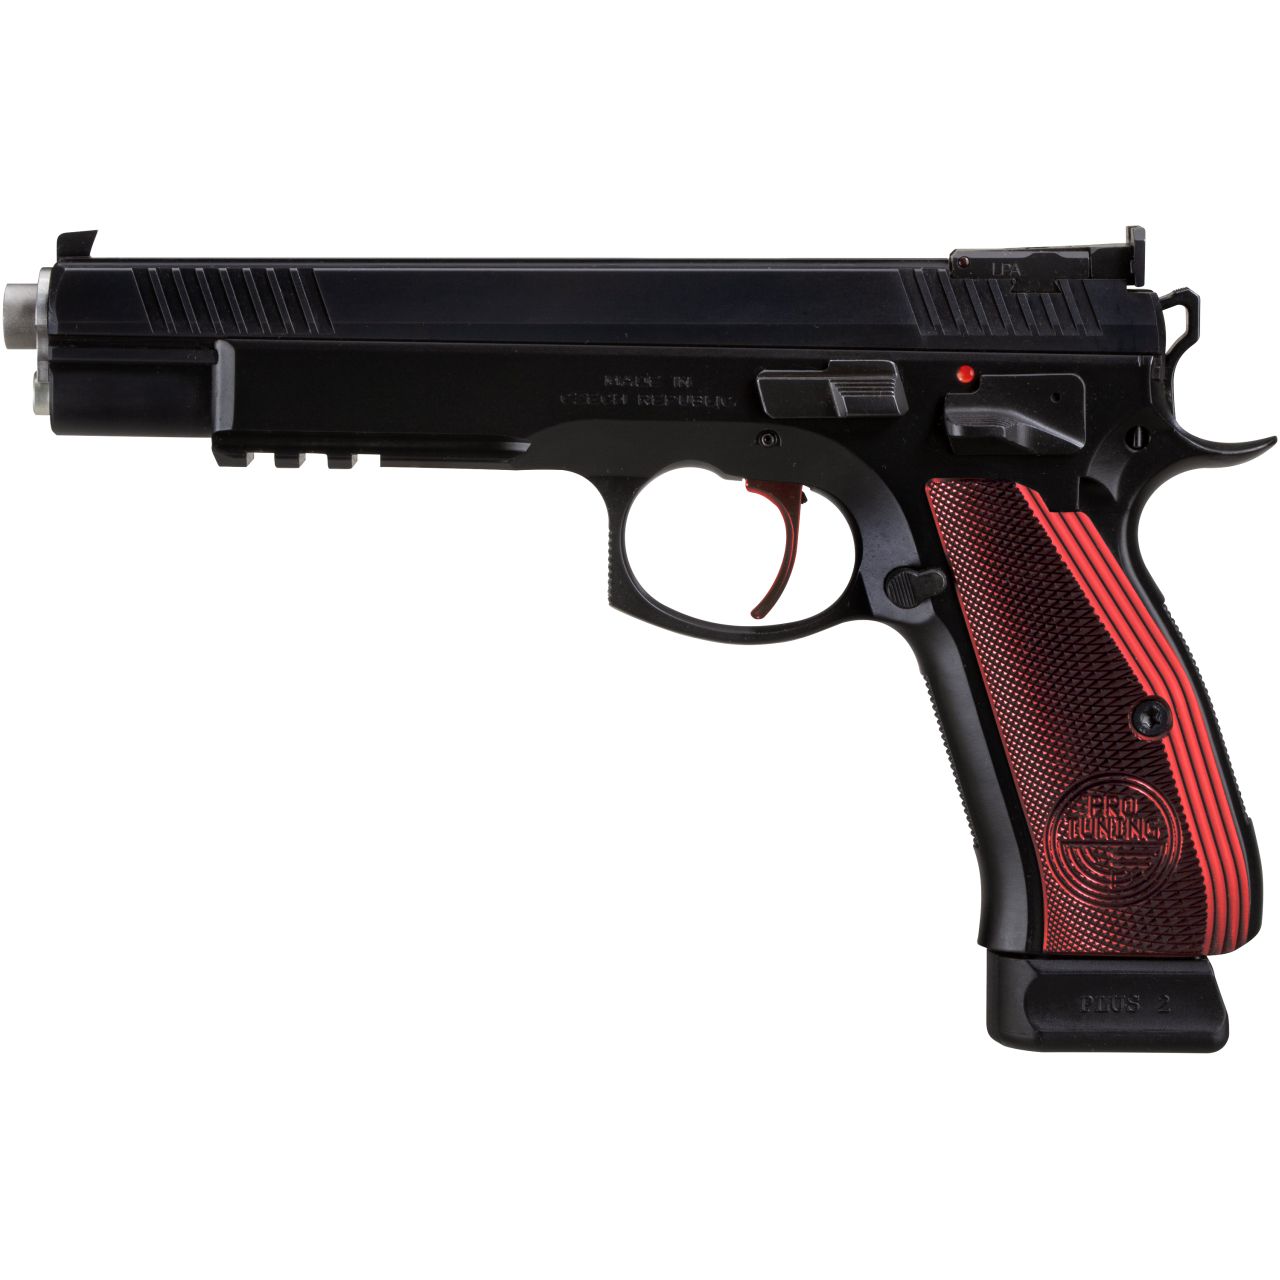 Pro Tuning Modell Taipan Red Kaliber 9mm Luger